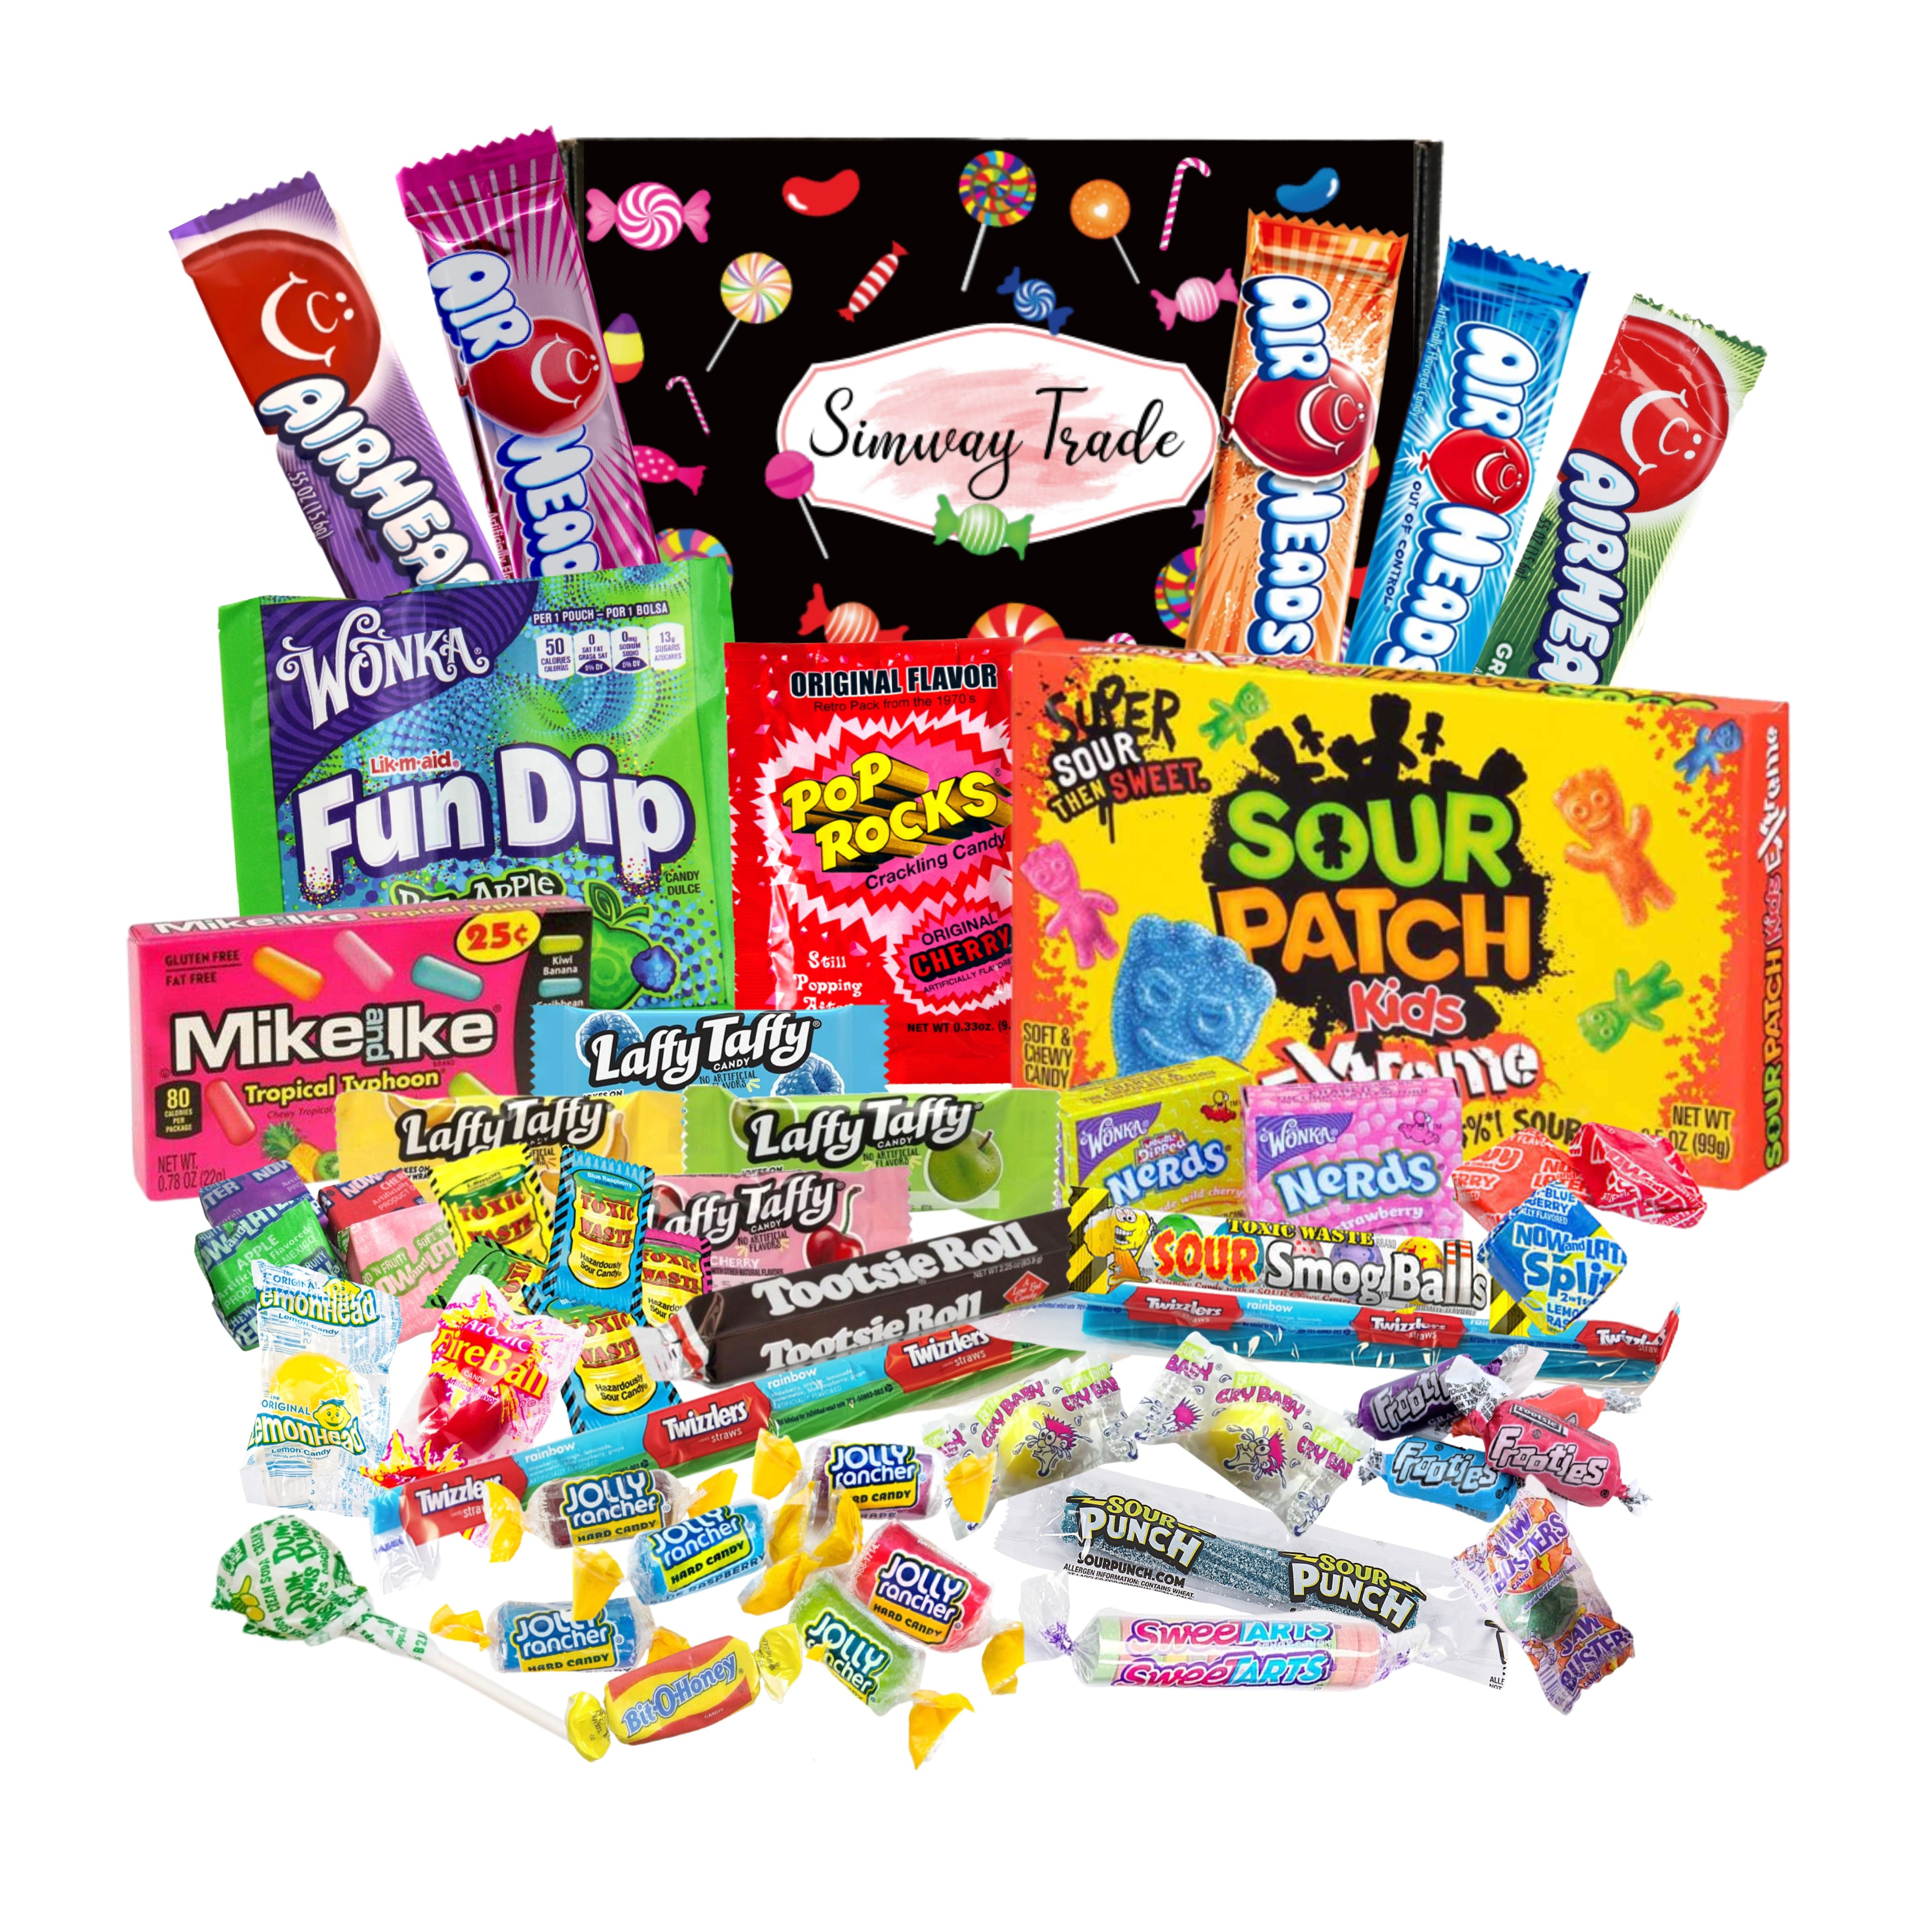 Heavenly Sweets American Candy Box Hamper and Chocolate Bar Gift